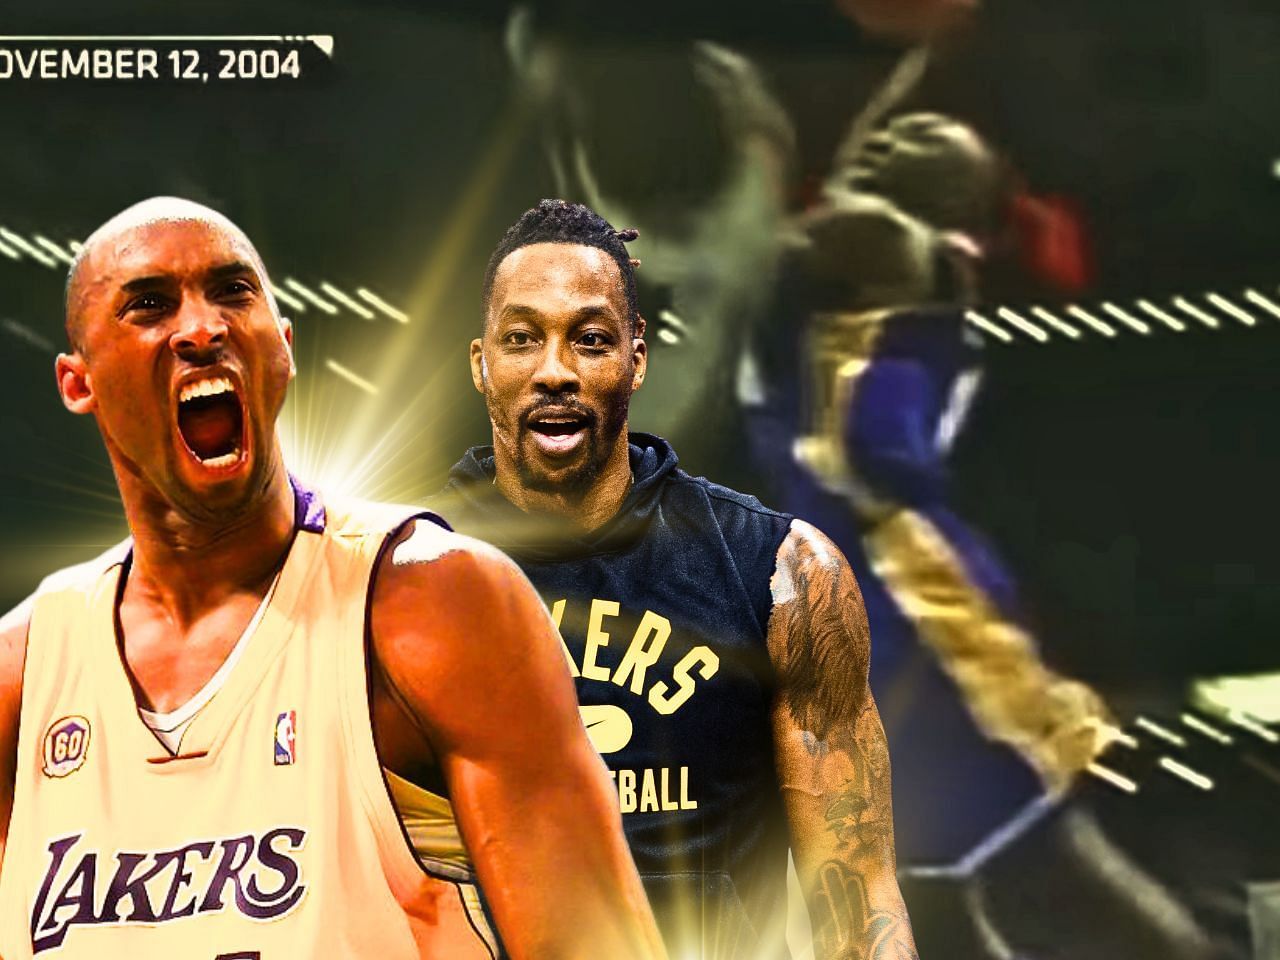 When Dwight Howard got served with welcome to NBA moment by Kobe Bryant